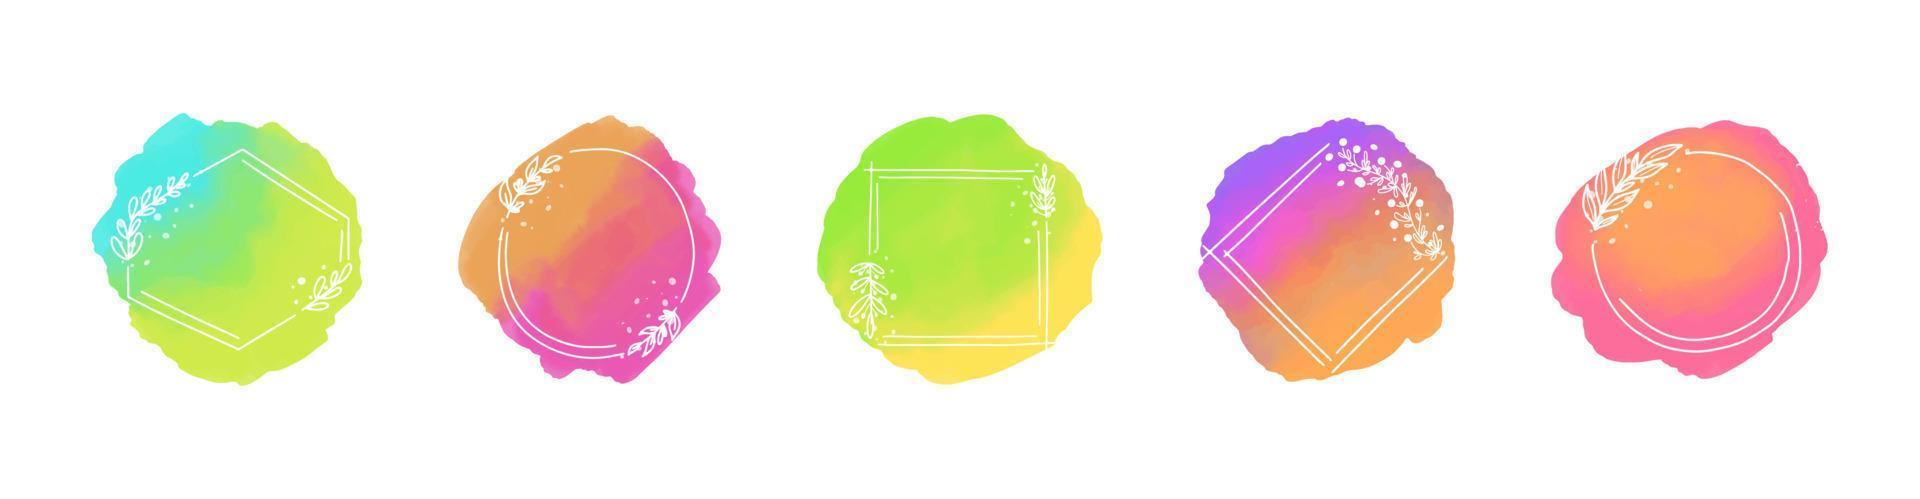 Floral frames set with abstract watercolor blots on the background. Vector illustration